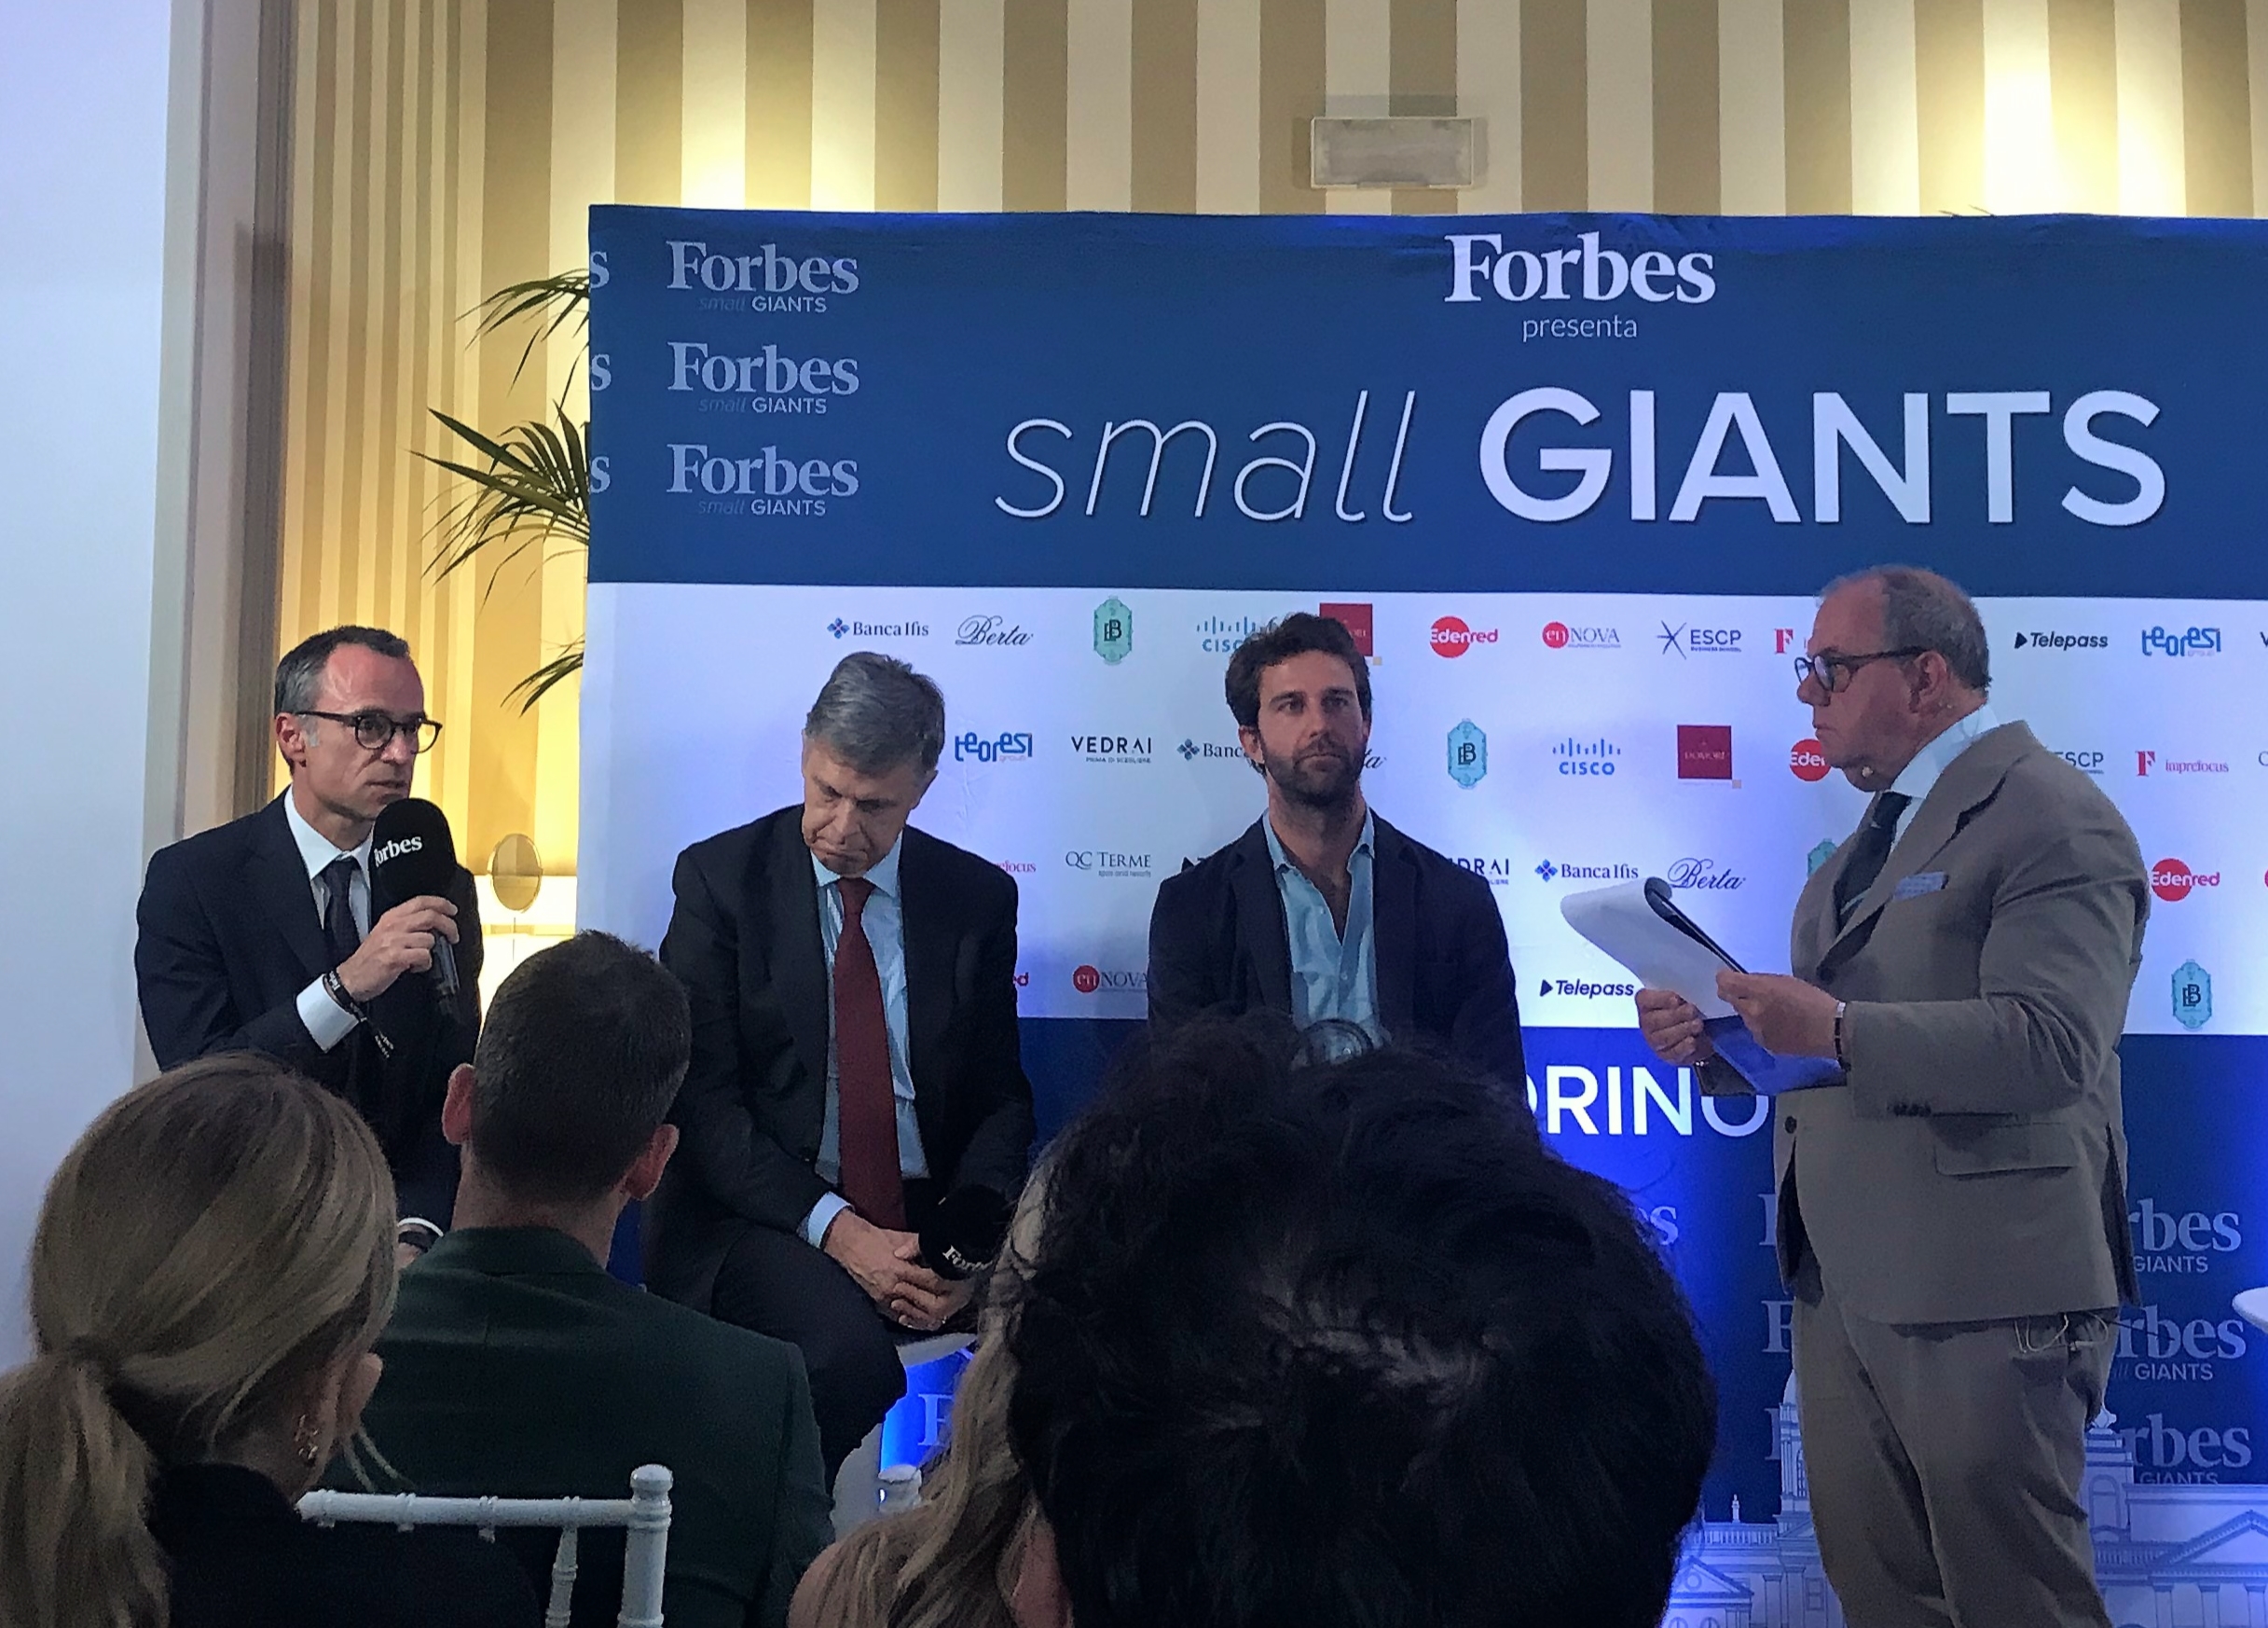 Forbes Small Giants